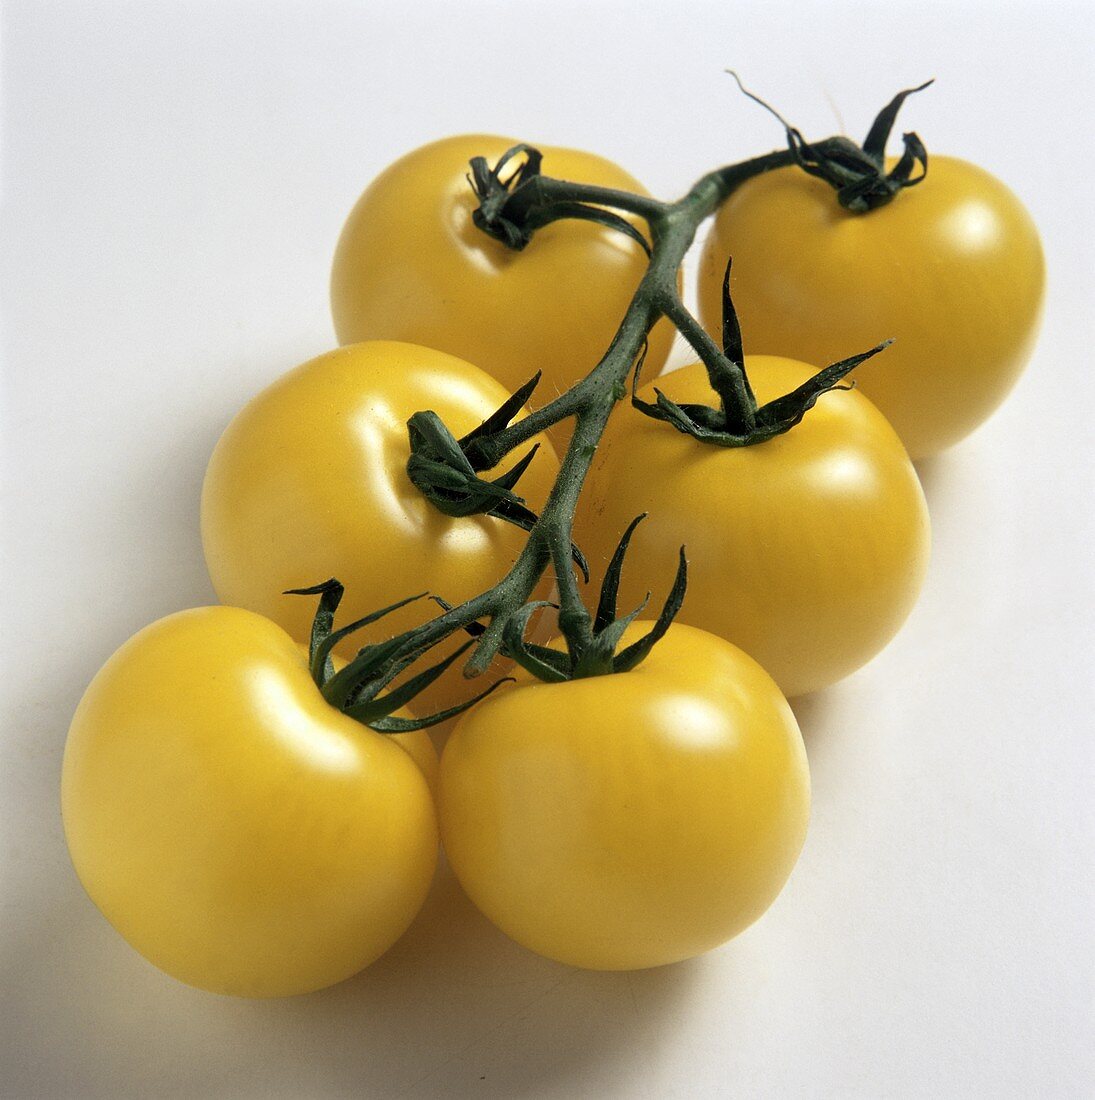 Six yellow tomatoes on the vine